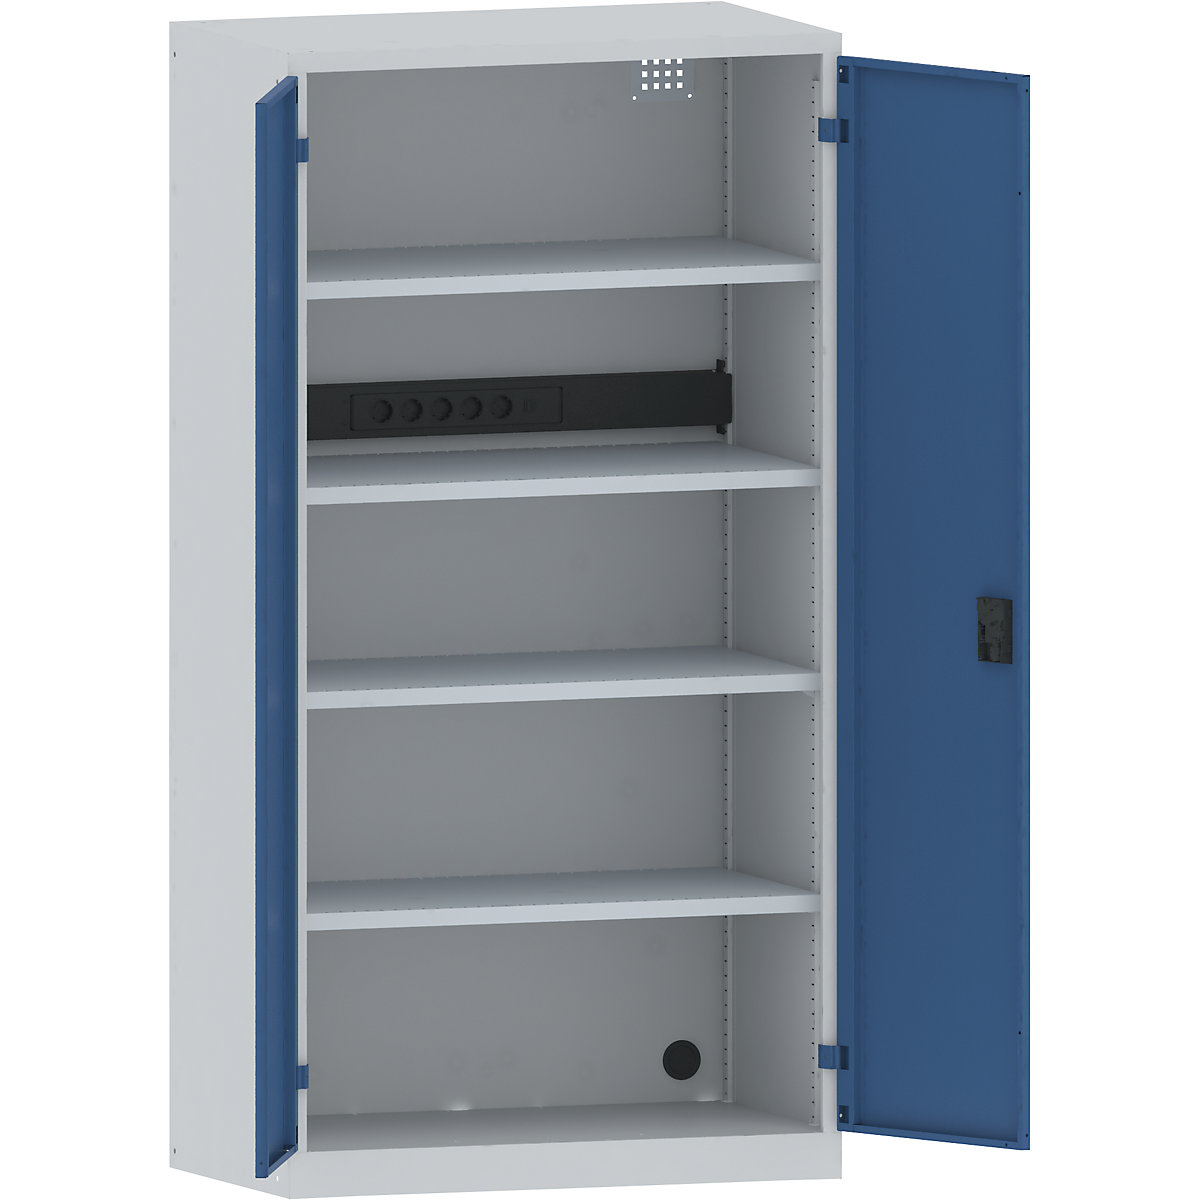 Battery charging cabinet – LISTA, 4 shelves, solid panel doors, power strip at rear, grey / blue-17